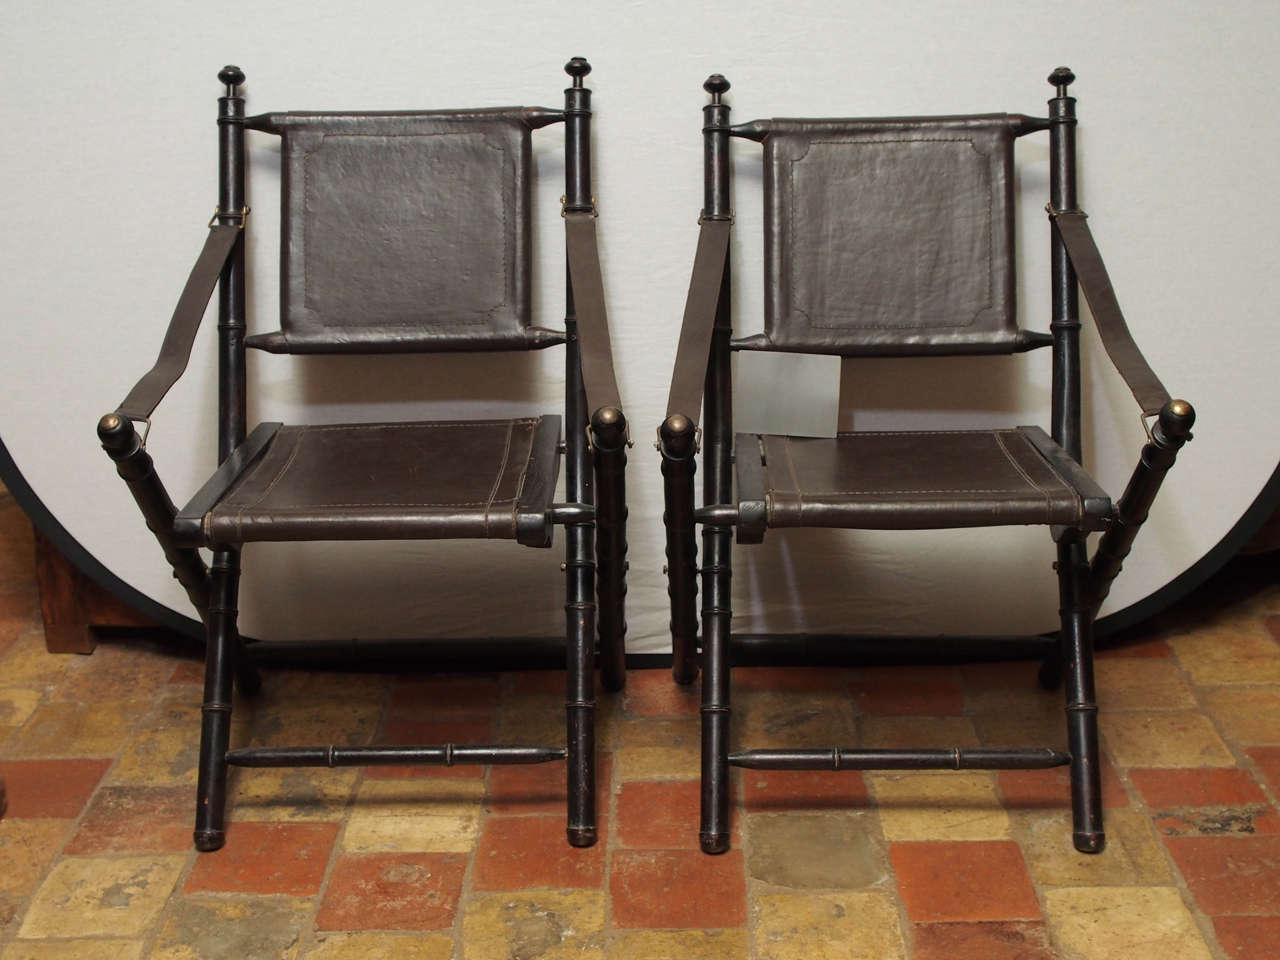 19th century French leather folding Campaign chair with painted wooded frame, circa 1890. These type chairs were used in outdoor events such as safaris.